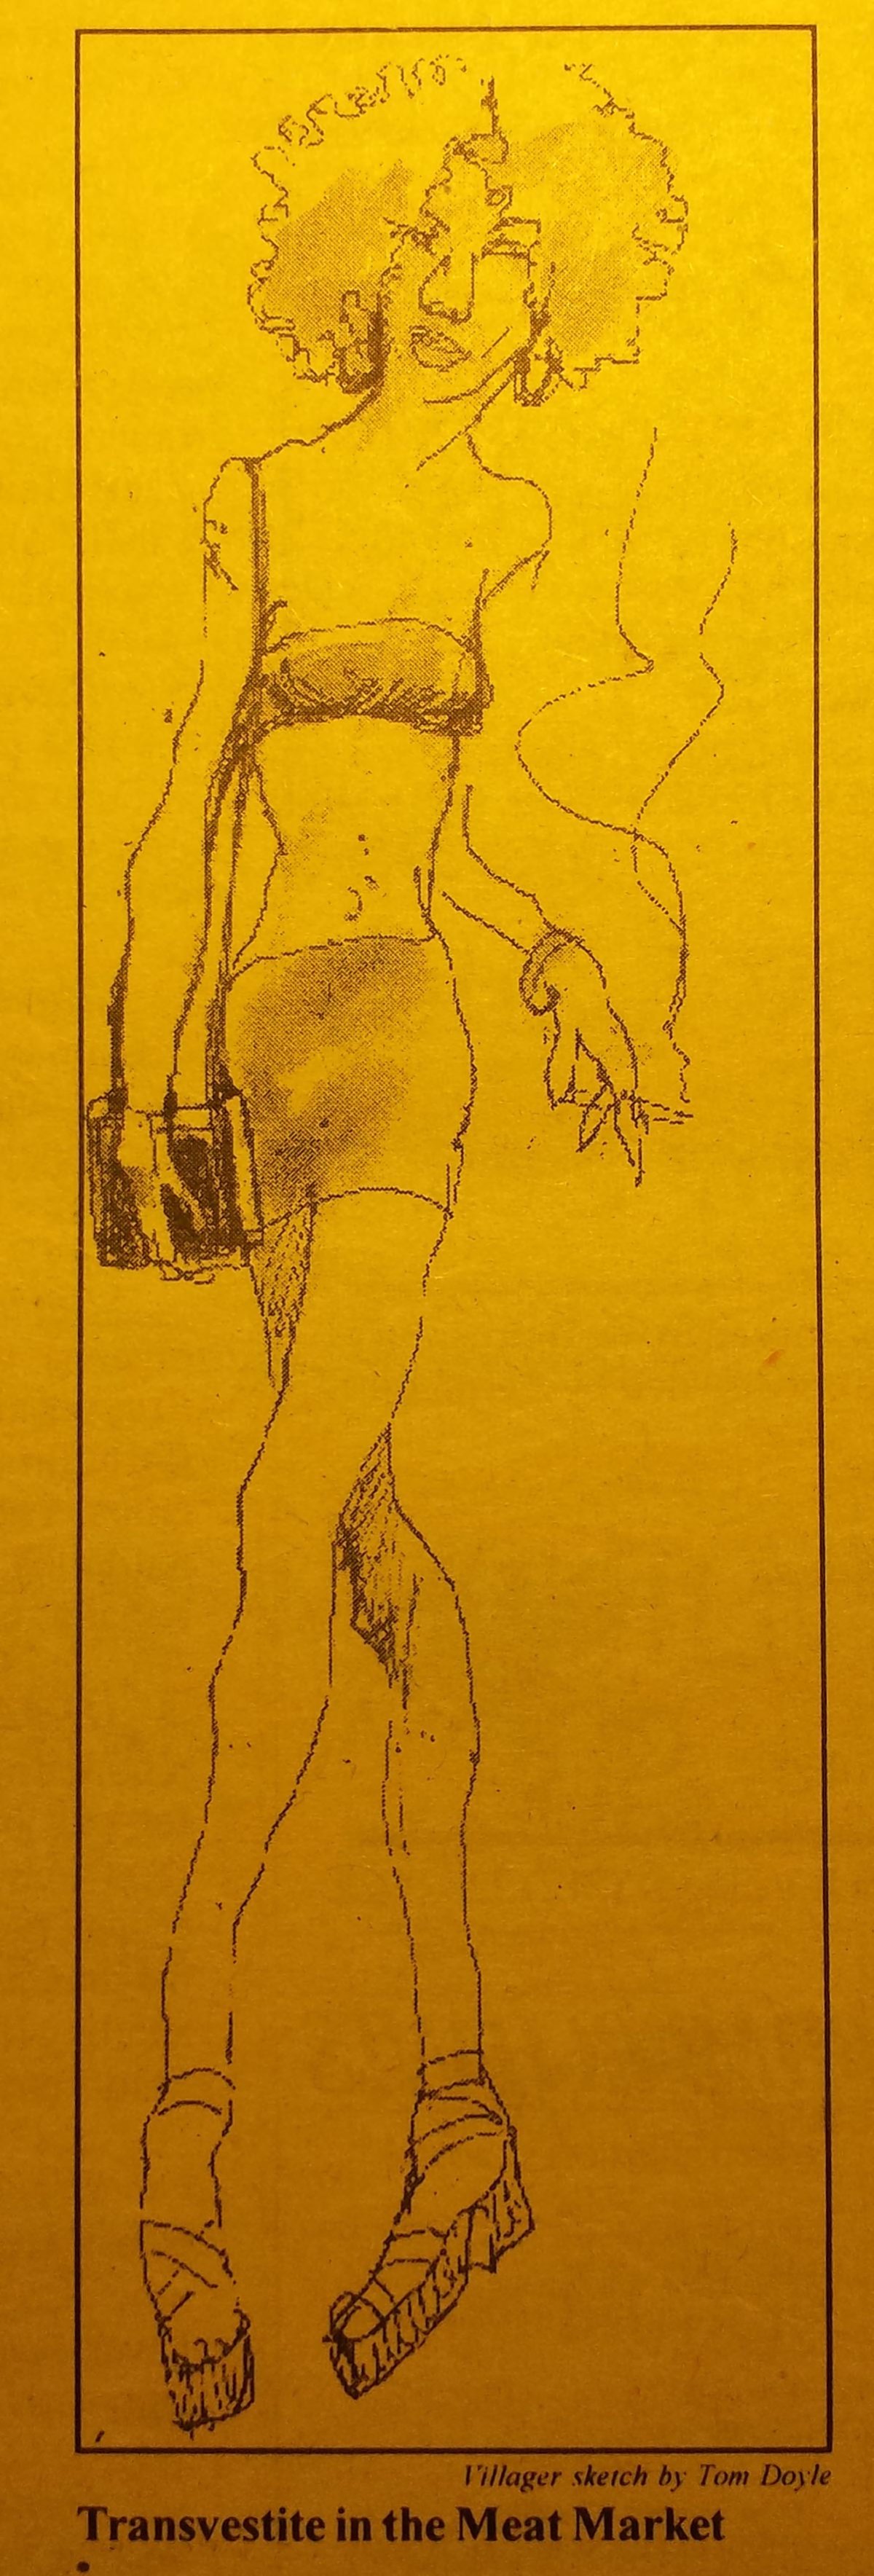 A sketch of a transgender prostitute in the Meat Market circa 1980s or early ’90s. Due to changes in the once-desolate nighttime Meatpacking District, the hookers would soon be pushed down into the Village’s quiet residential streets from their traditional stomping ground on W. 14th St. Sketch by Tom Doyle